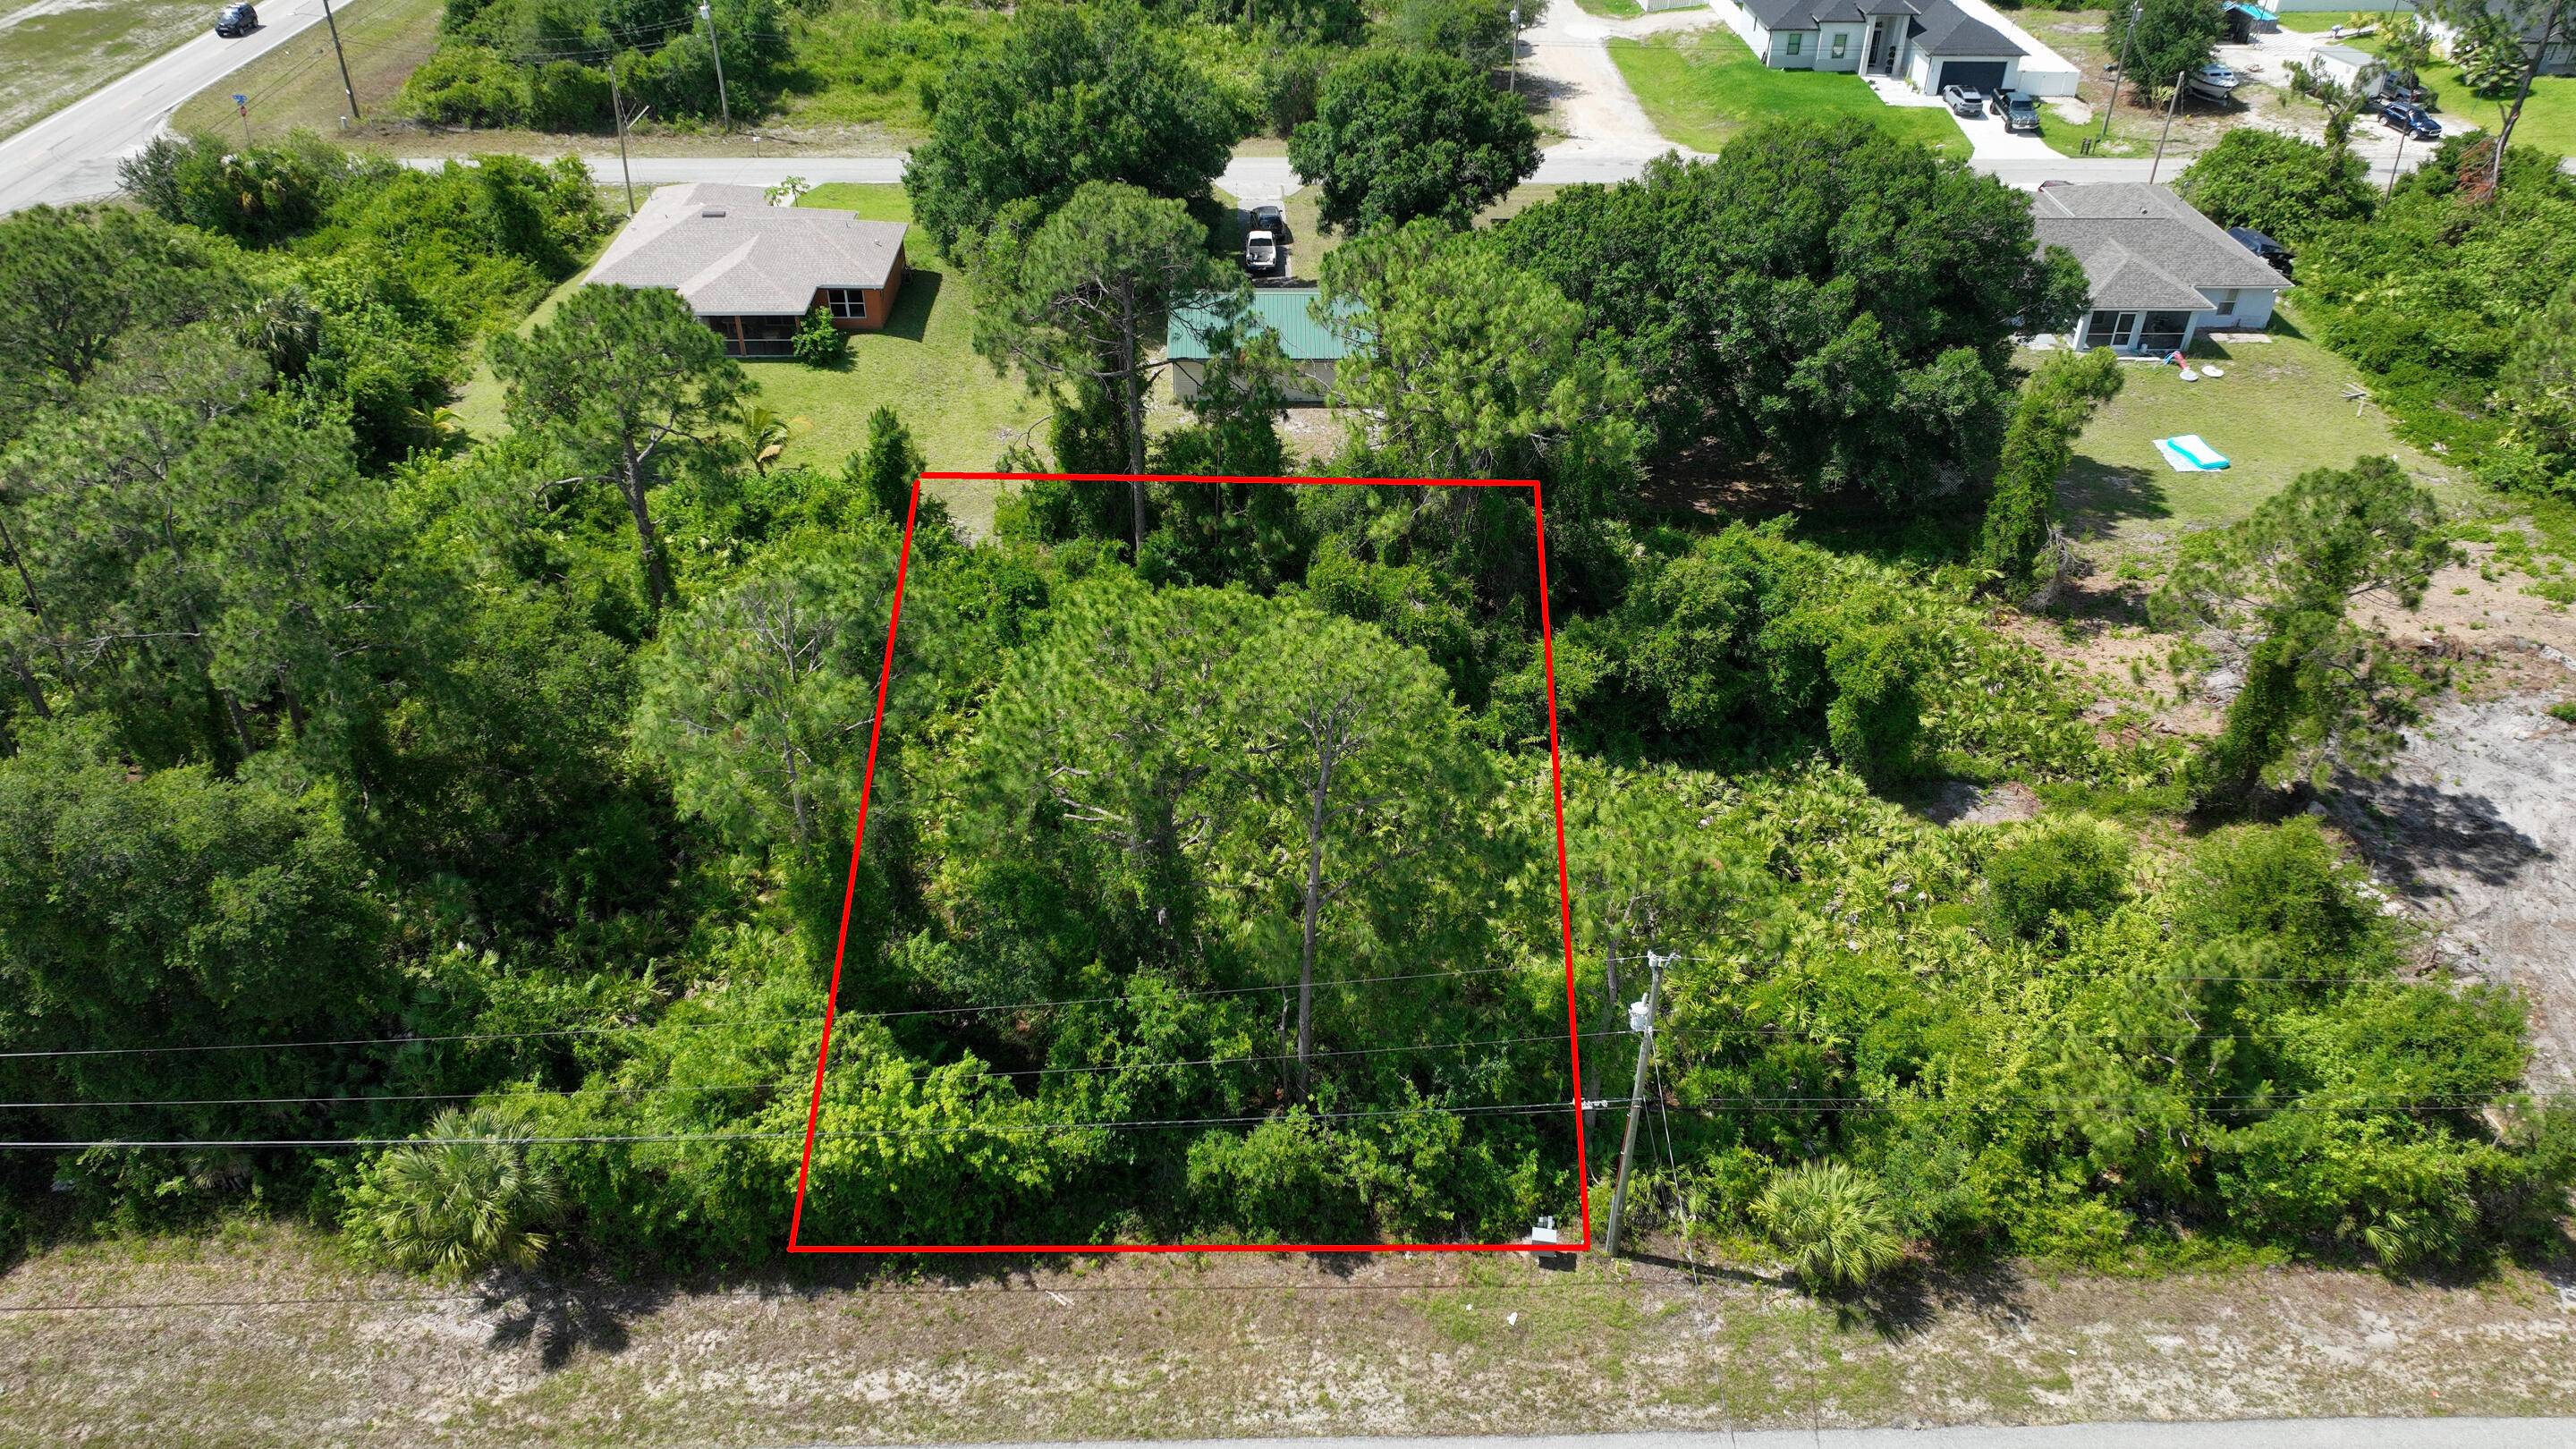 Seize the opportunity to build your custom home on this lot.